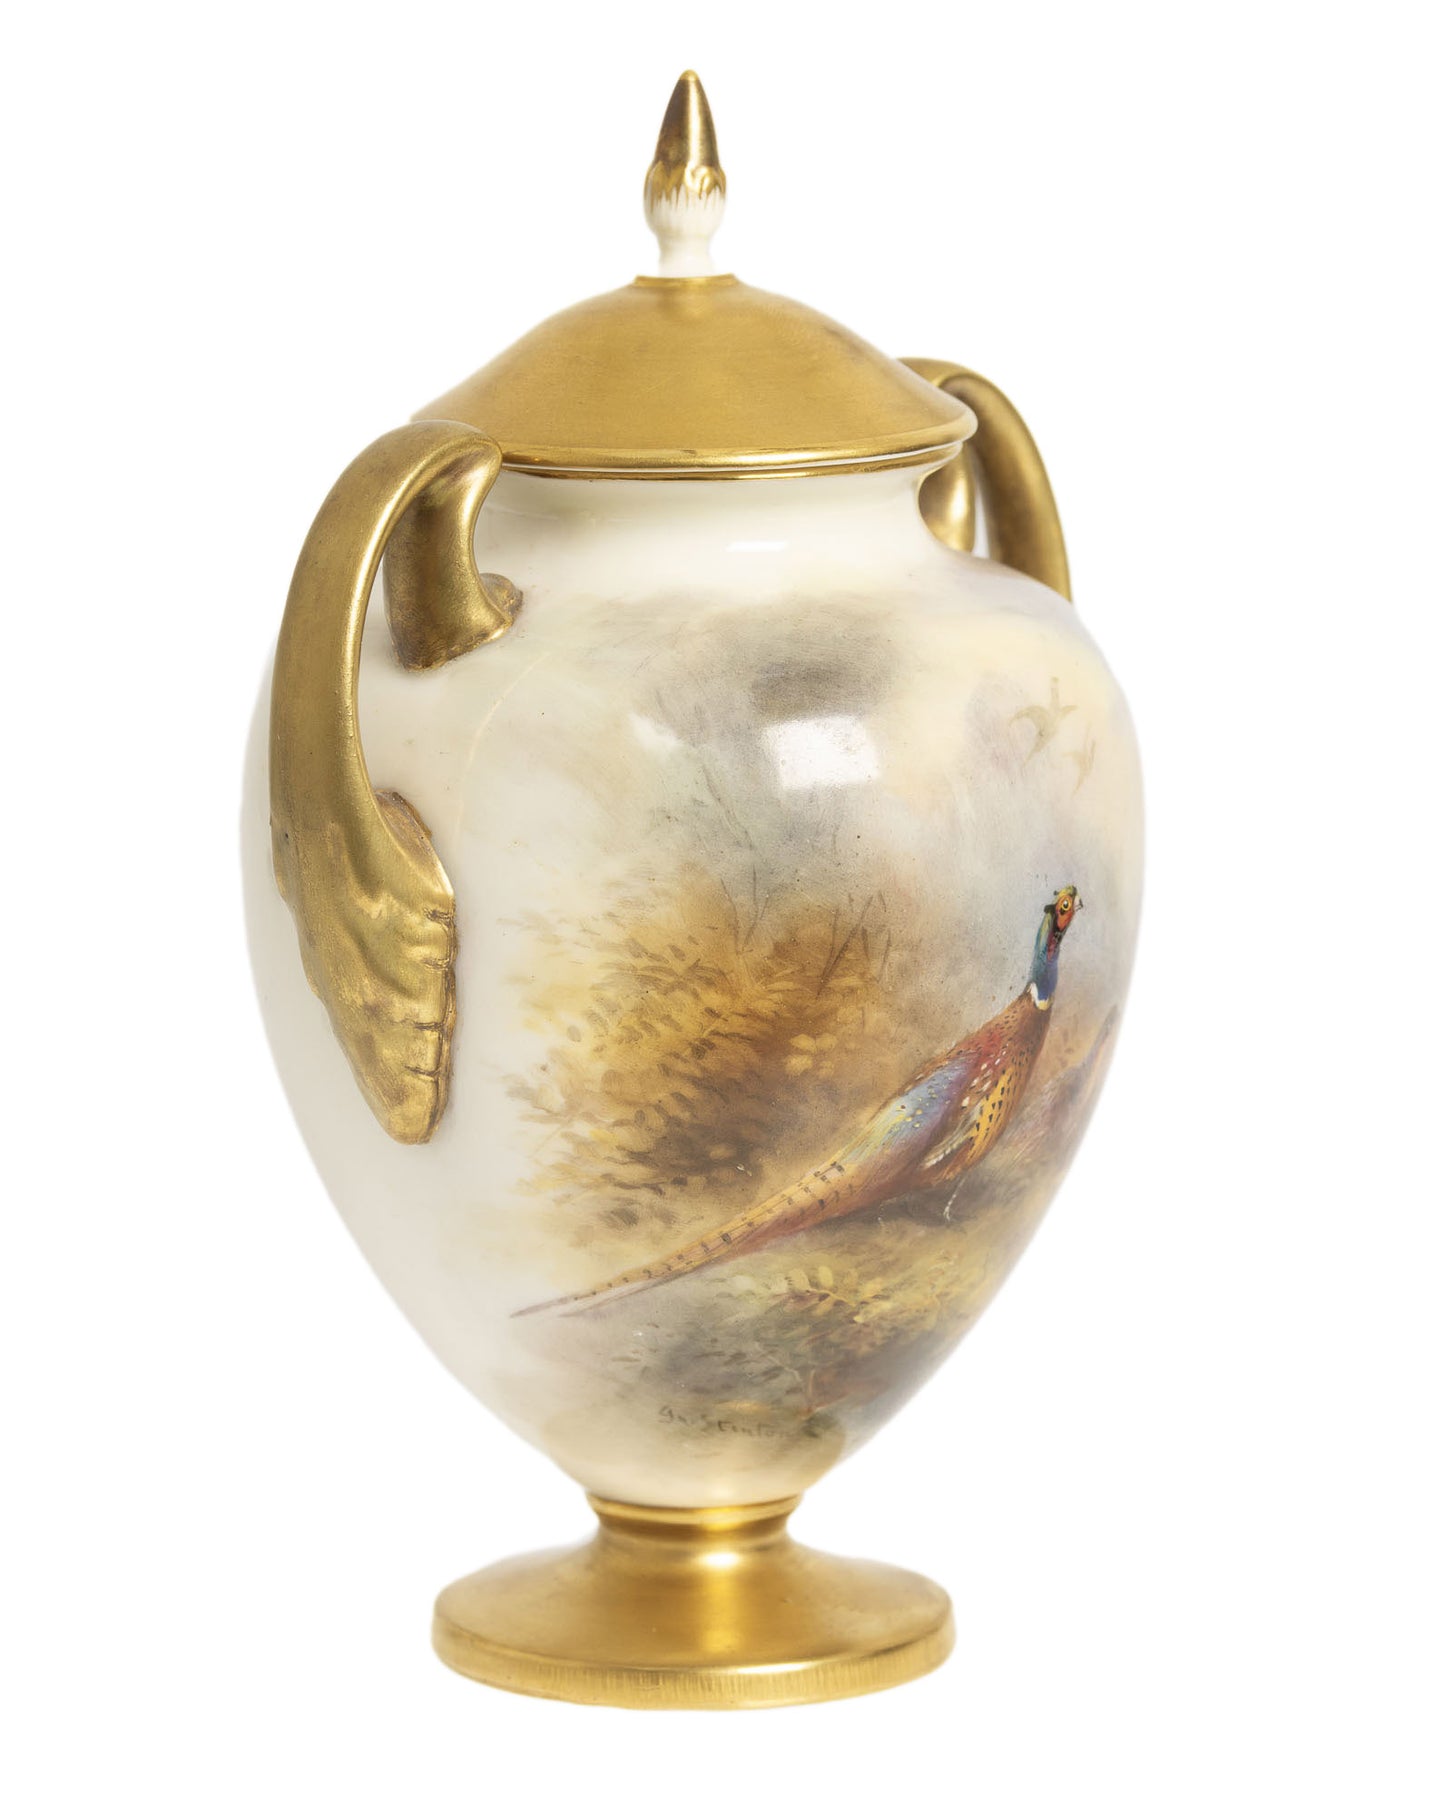 Royal Worcester Hand Painted Covered Vase with Pheasants by James Stinton 1930 (2954)